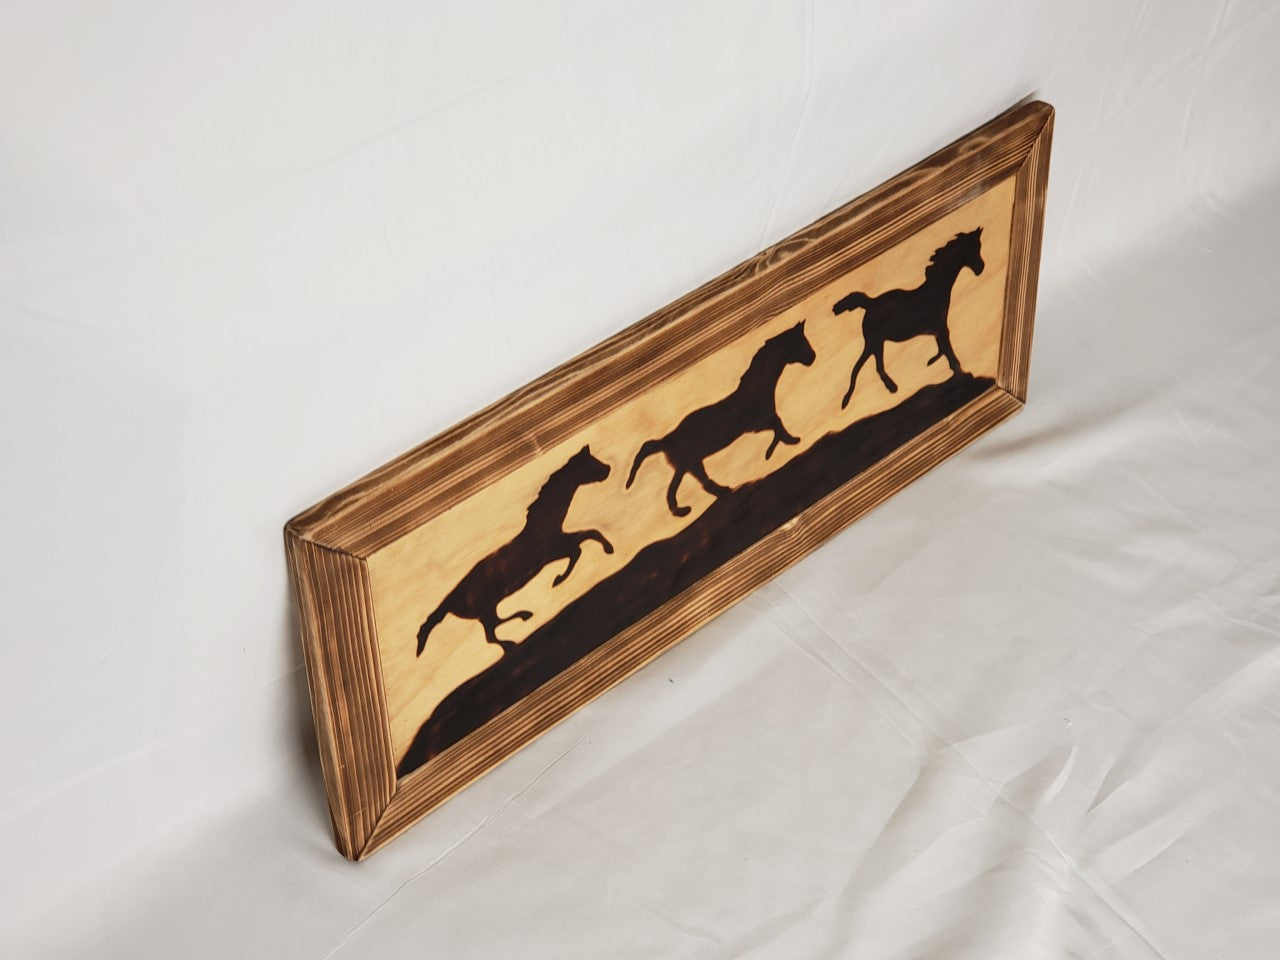 Wood Burned Horses In Wooden Frame Artist" Michael McMahon  Silhouette of three horses running on a hill  Burned into plywood with wood burned frame  Coated in clear polyurethane finish  Metal wire hanger on the back  28" long x 12" high x 3/4" wide  Would be a great gift for any cowboy or cowgirl